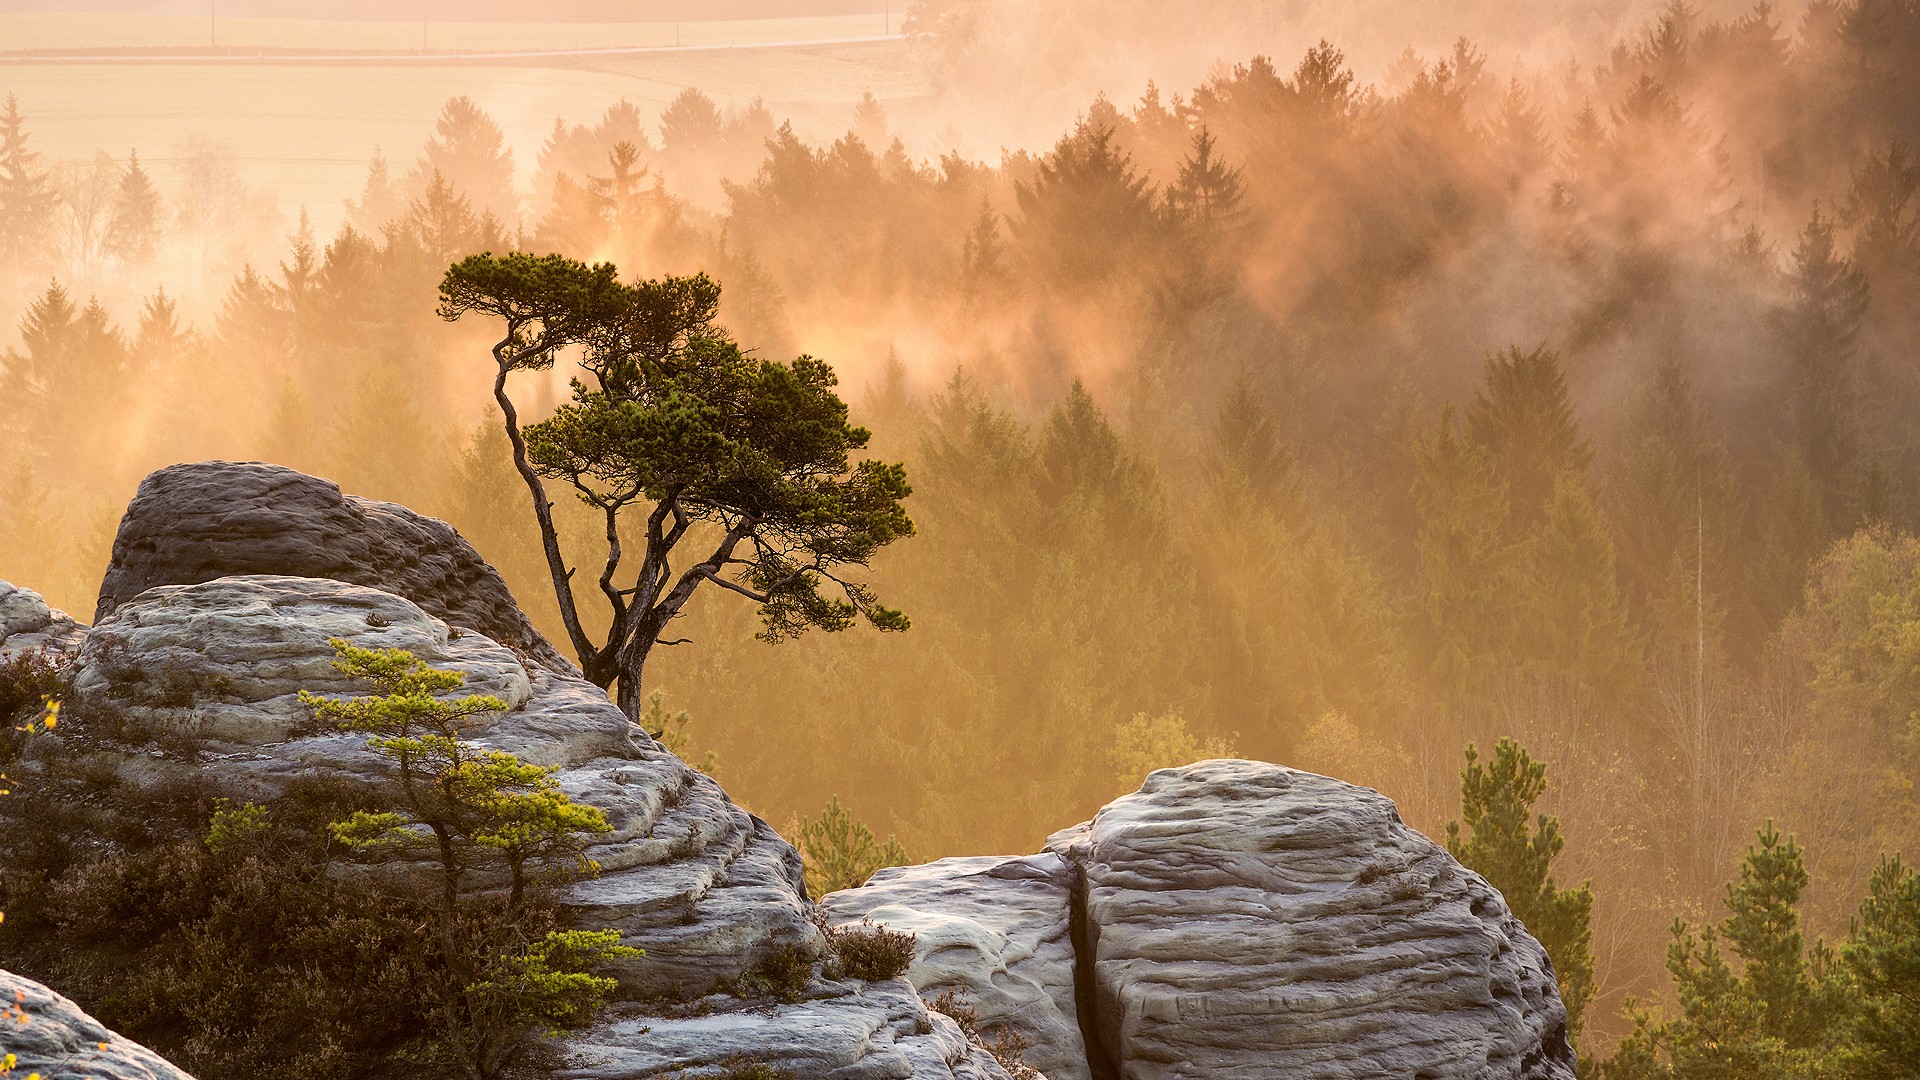 General 1920x1080 nature landscape mountains trees rocks mist forest sunset sun rays